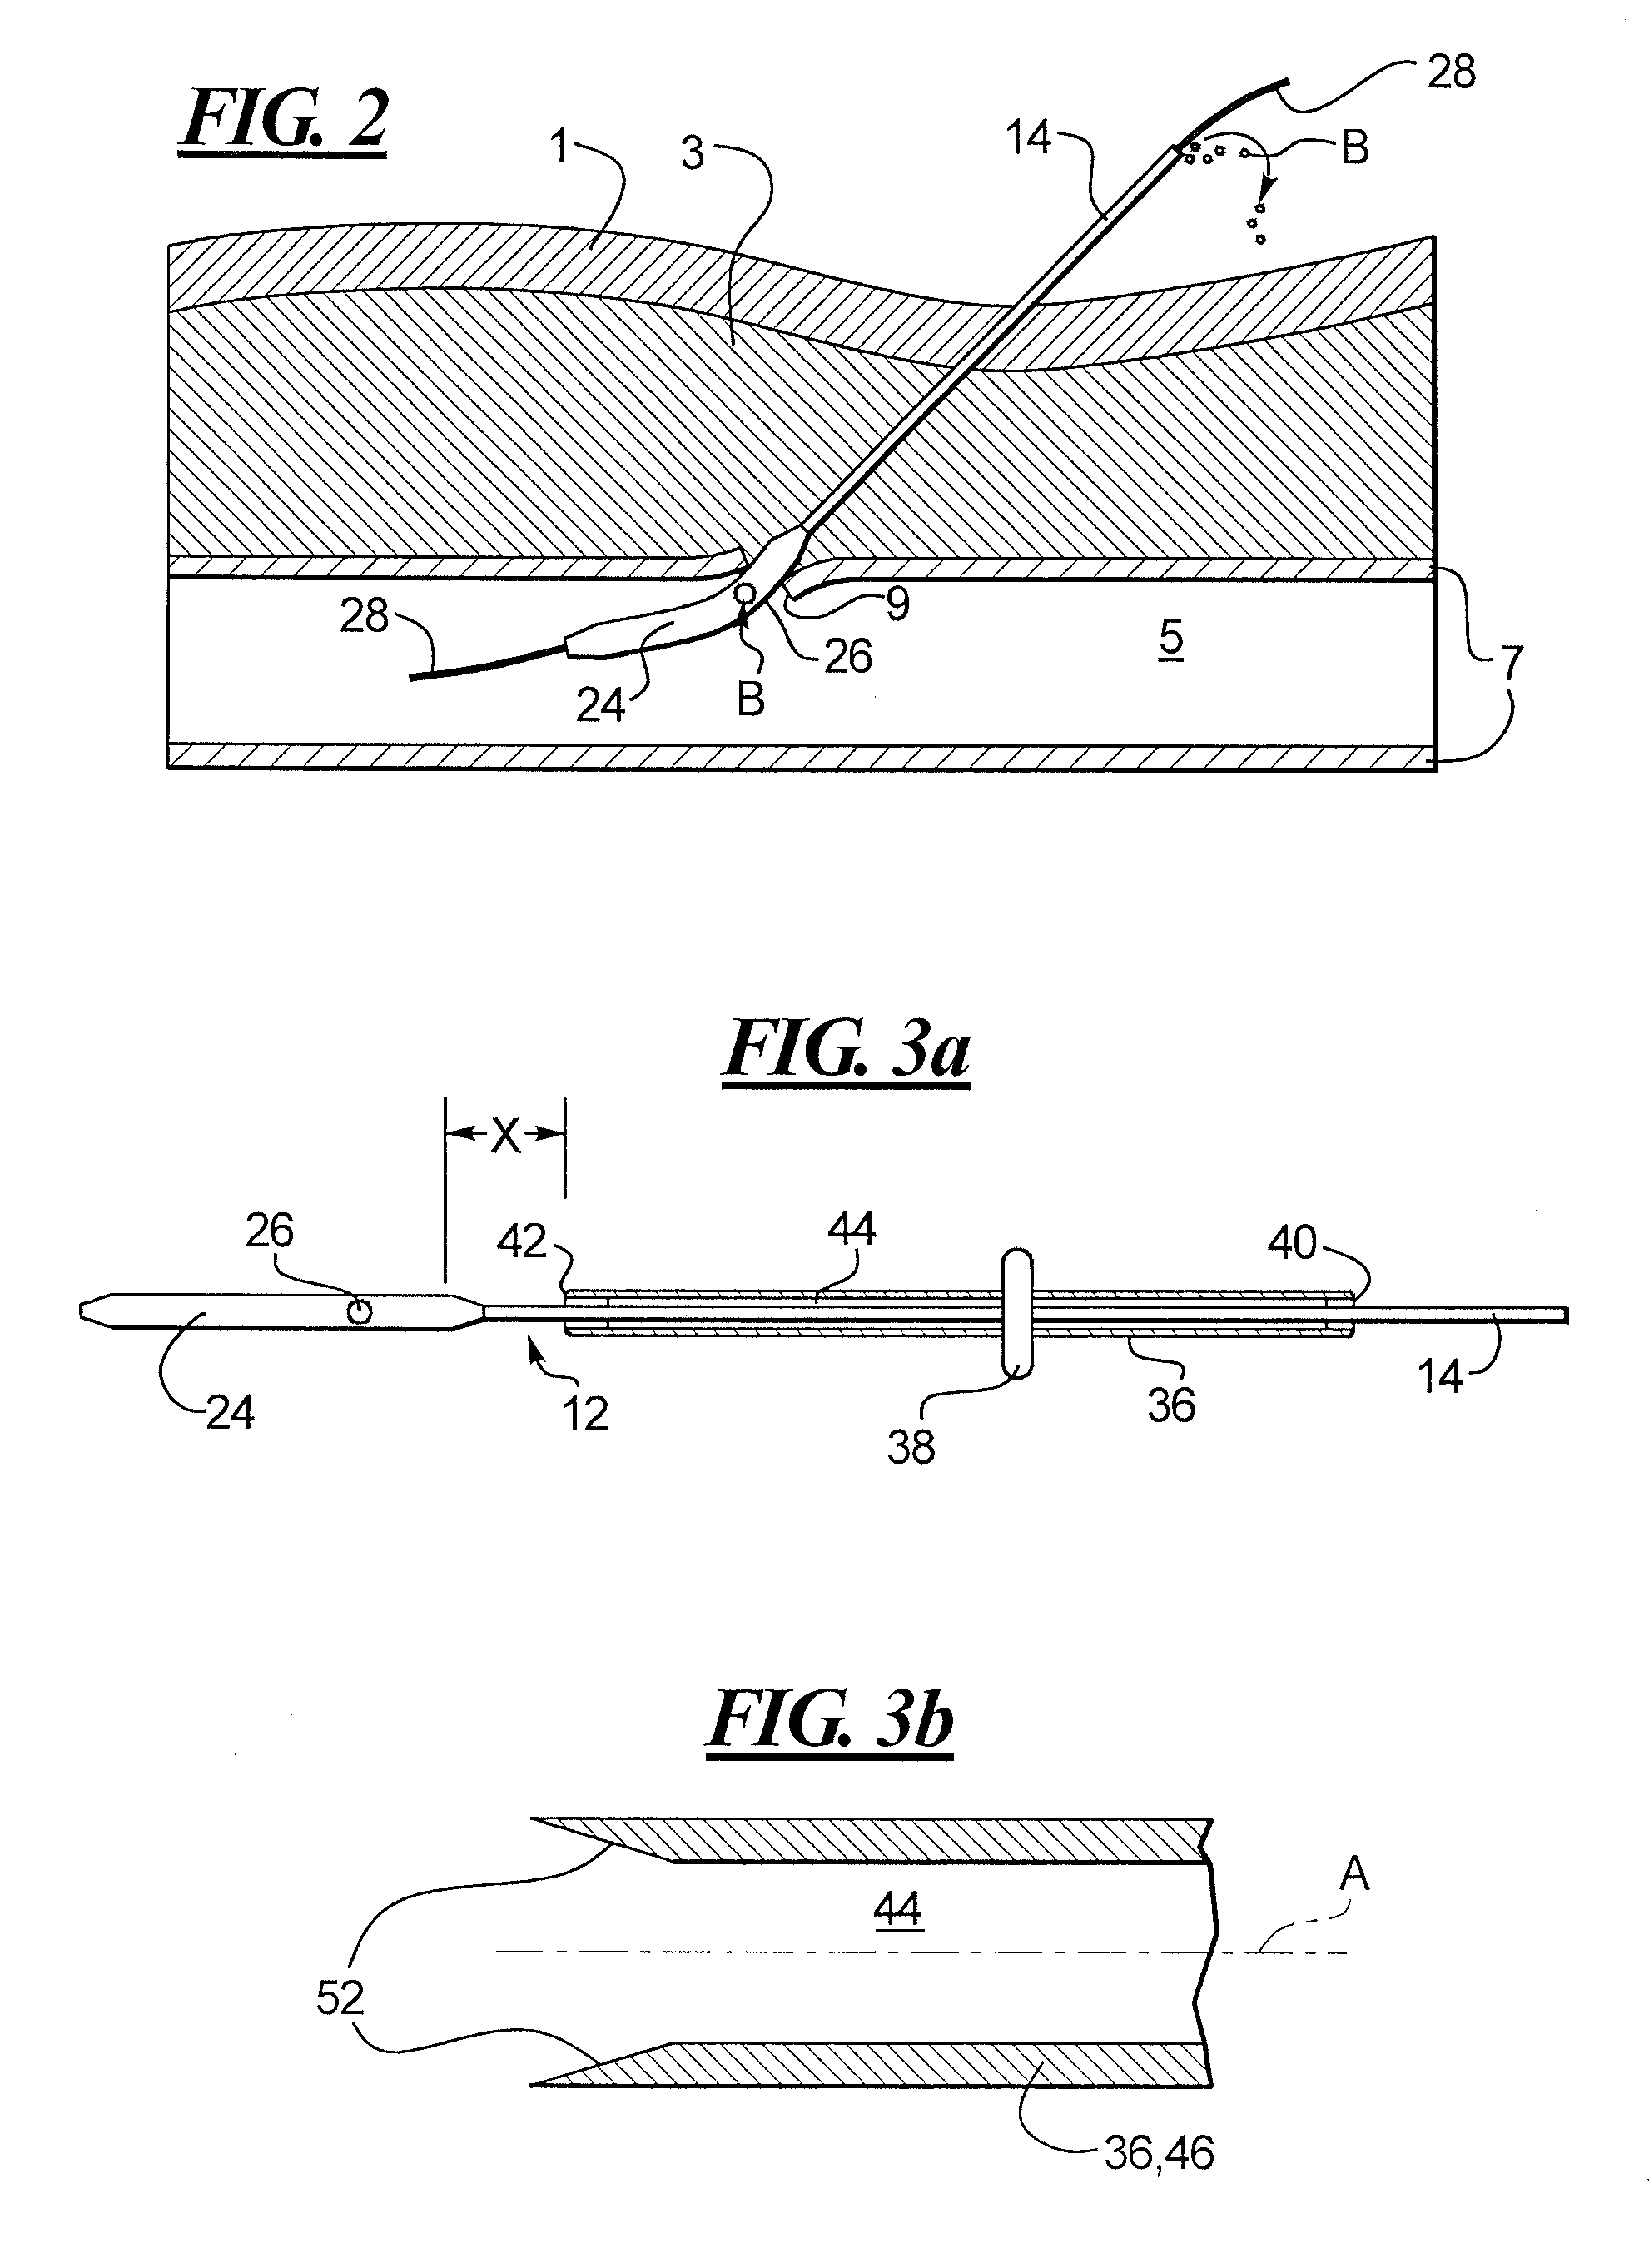 Depth and puncture control for system for hemostasis of blood vessel